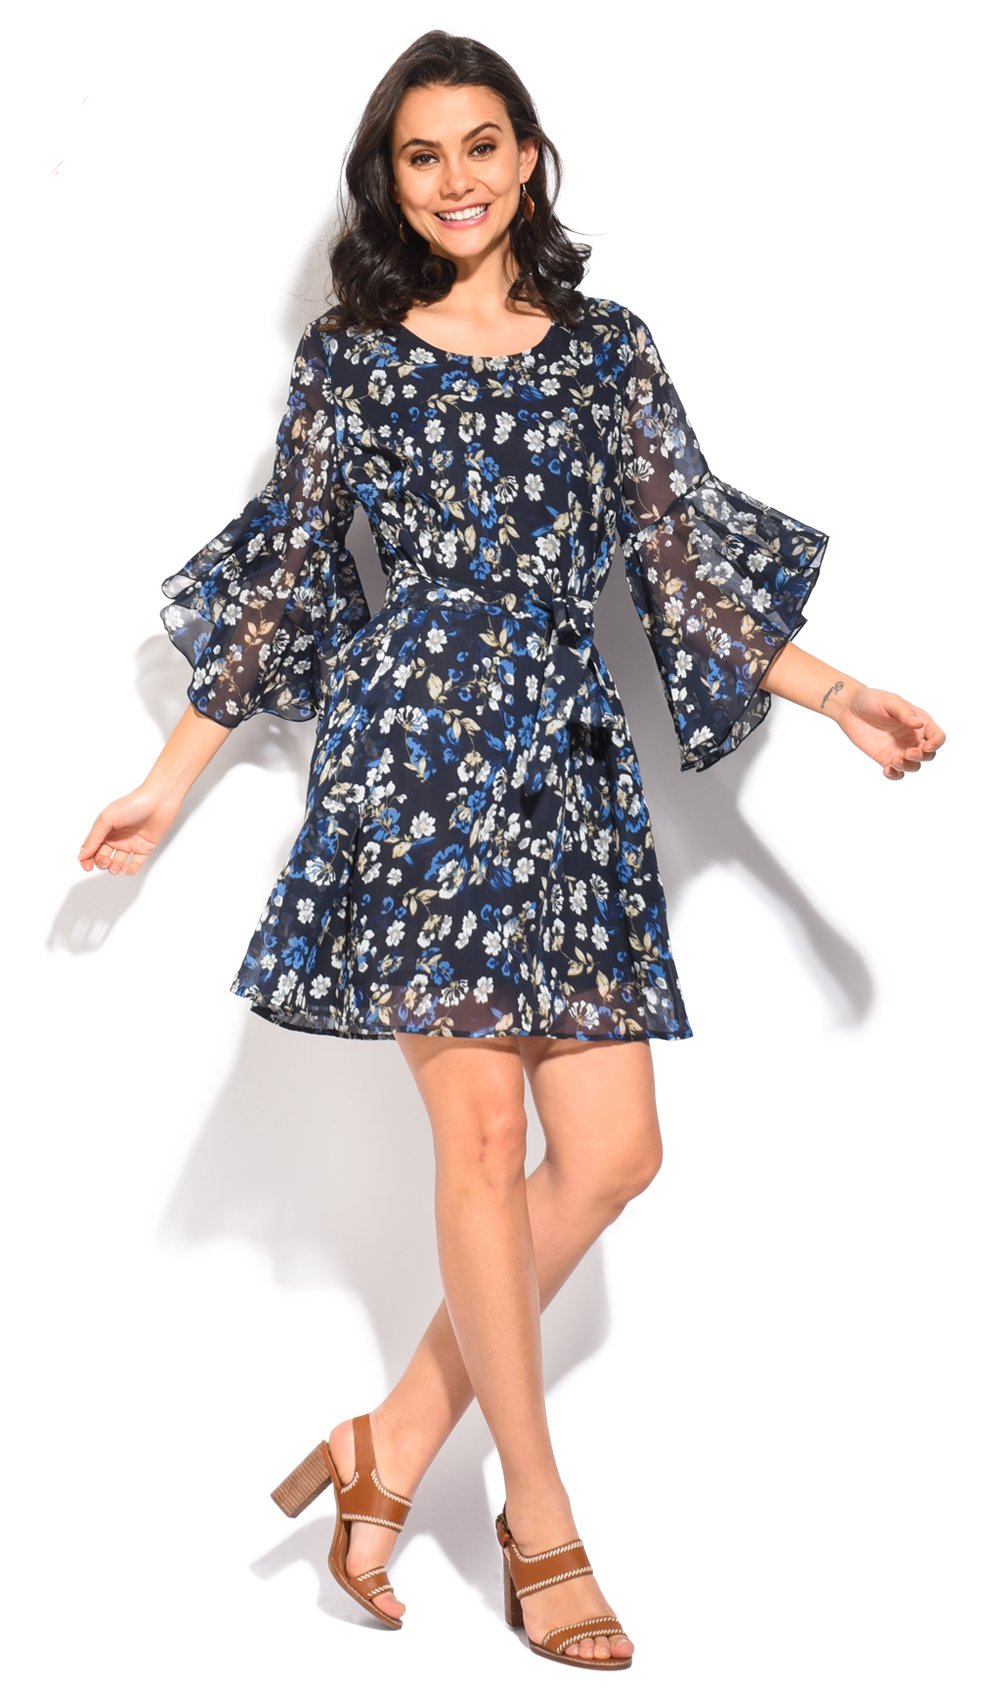 SHORT TRANSPARENT DRESS WITH LIBERTY PRINT AND HALF RUFFLED SLEEVES